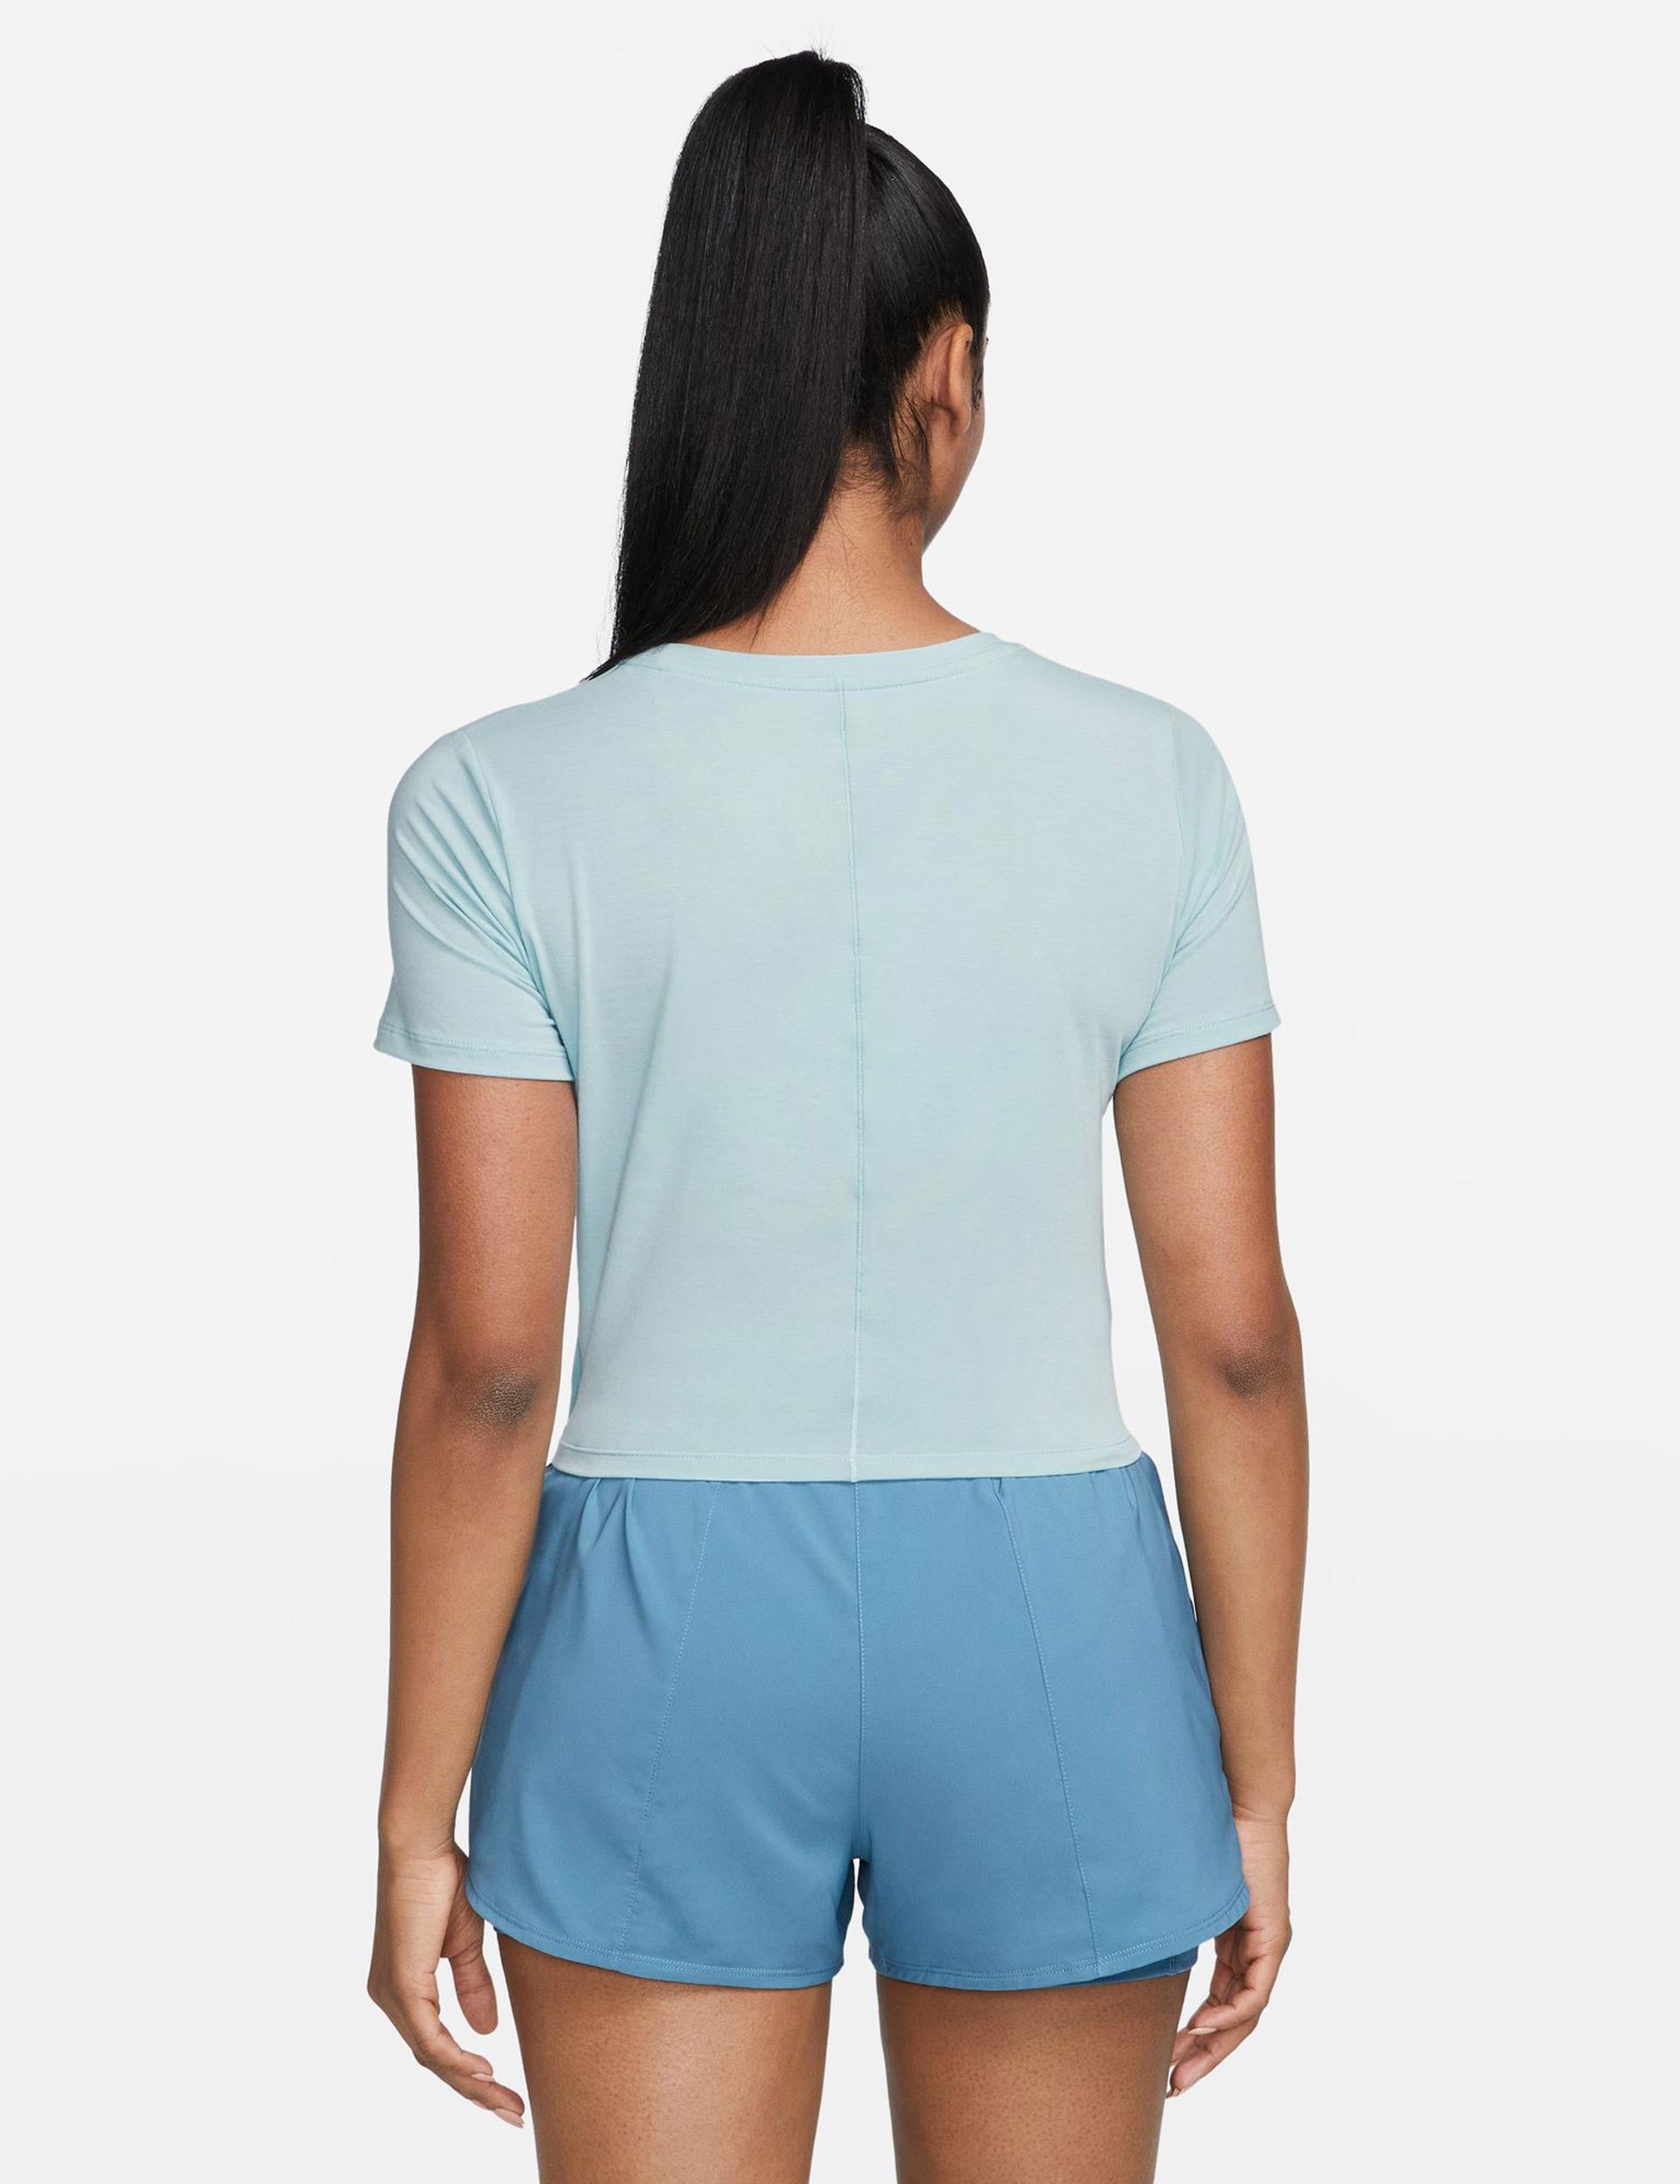 Nike Dri-FIT One Luxe Top - Ocean Blissimages2- The Sports Edit